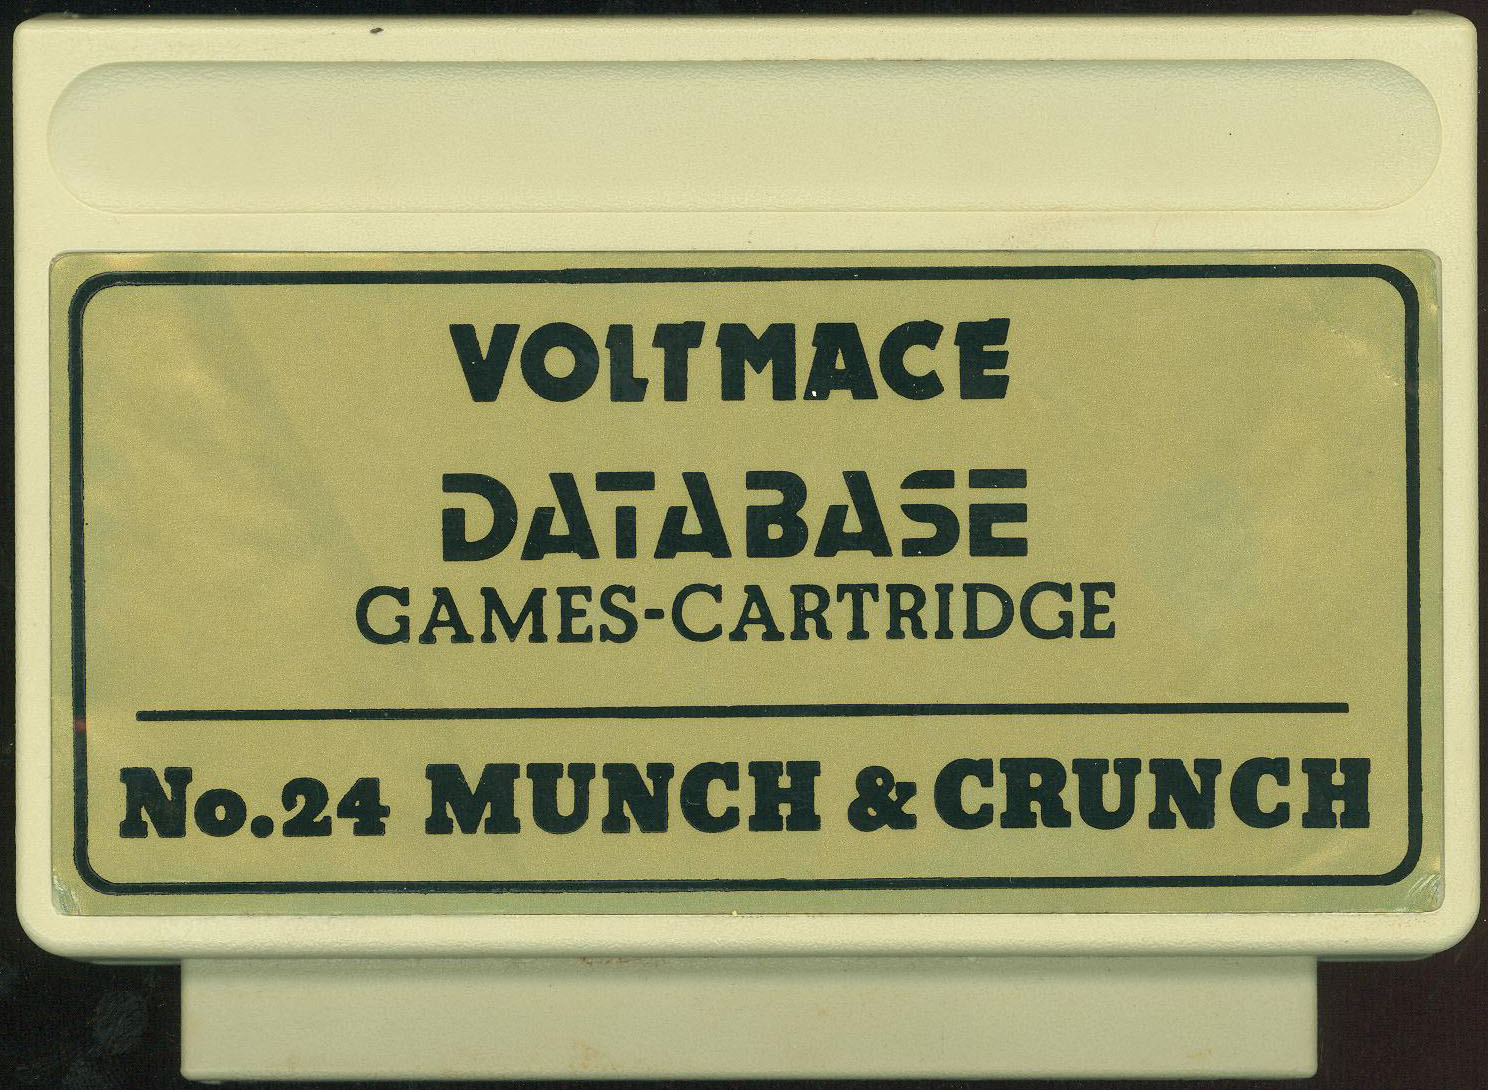 Munch & Crunch Images - LaunchBox Games Database